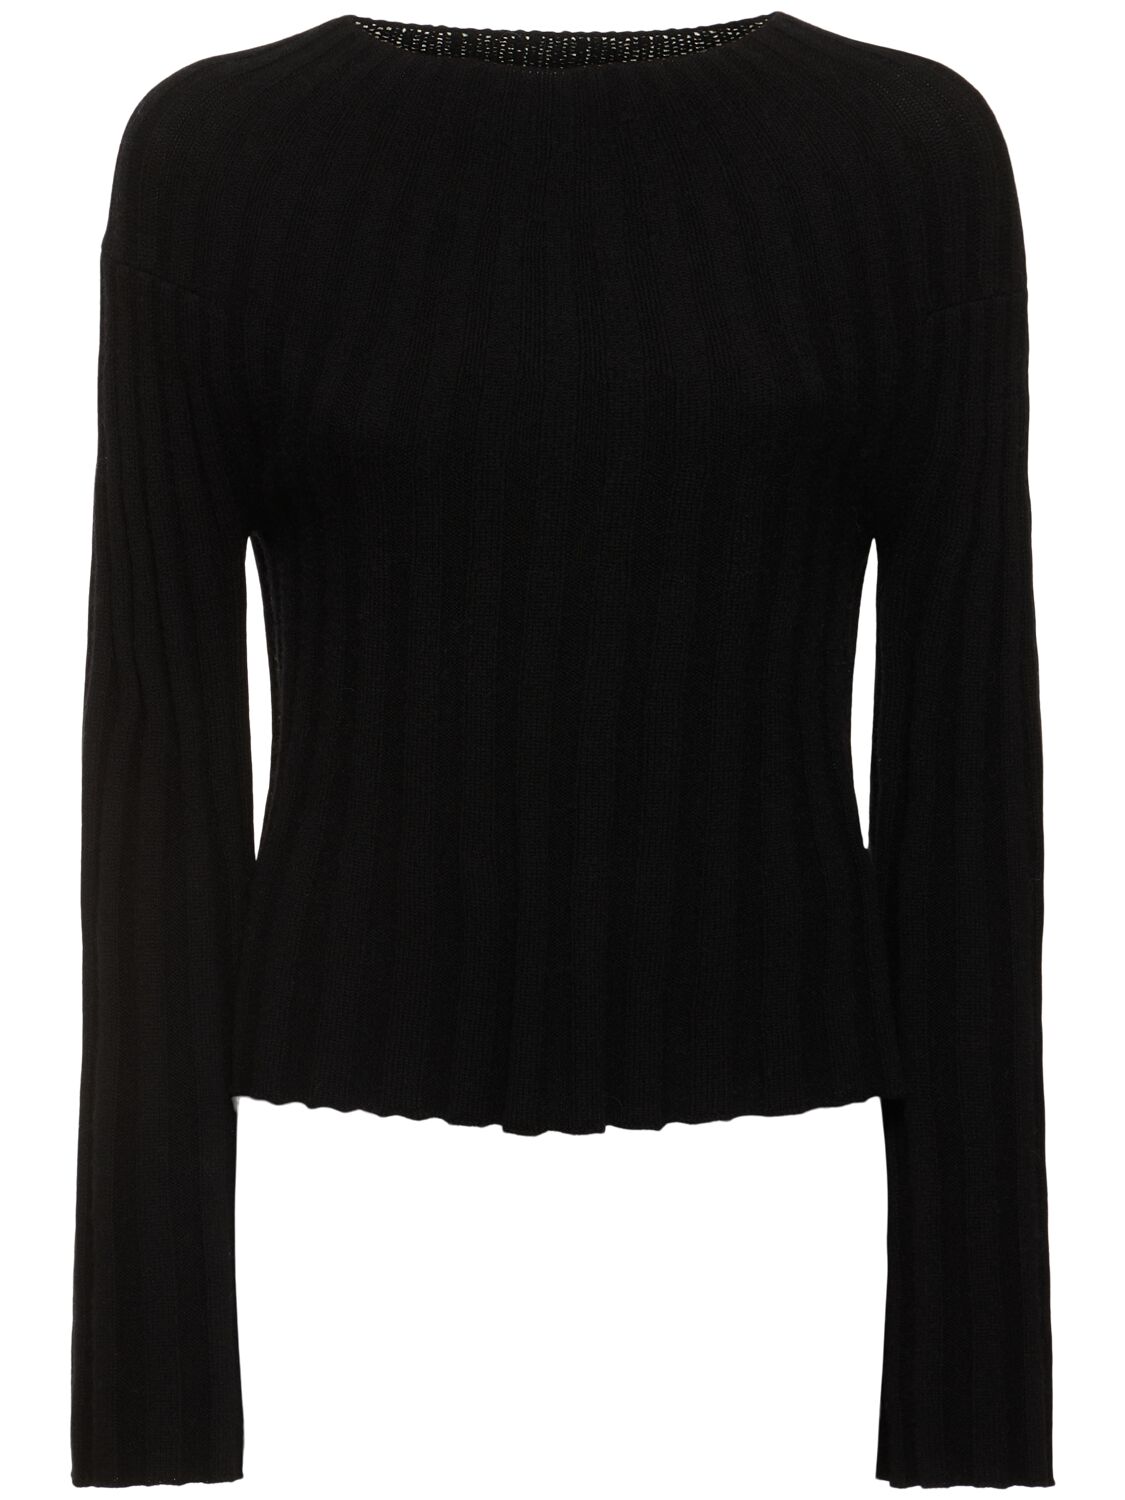 Loulou Studio Koro Ribbed Knit Wool Blend Sweater In Black